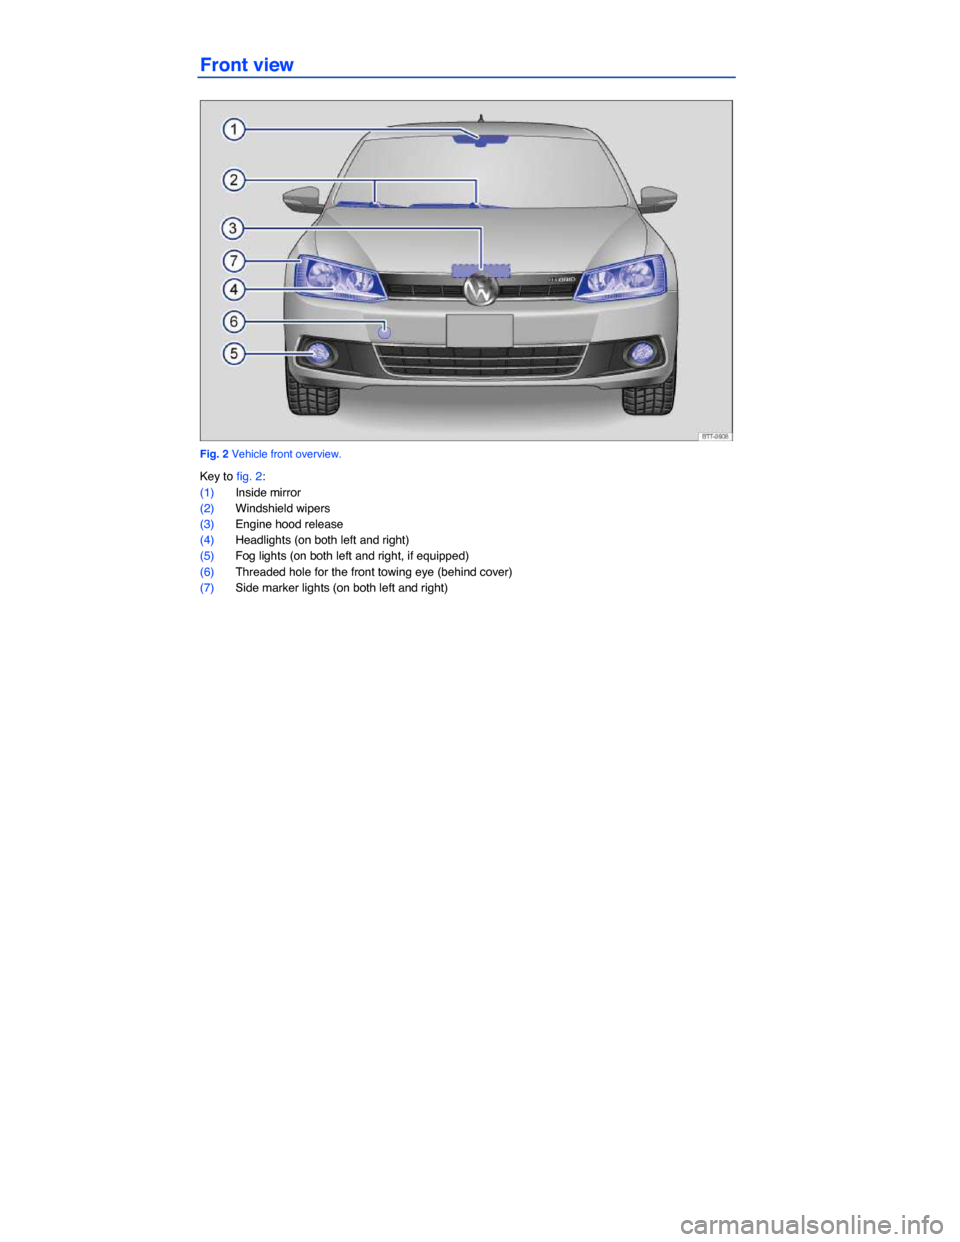 VOLKSWAGEN JETTA HYBRID 2014 1B / 6.G Owners Manual  
Front view 
 
Fig. 2 Vehicle front overview. 
Key to fig. 2: 
(1) Inside mirror  
(2) Windshield wipers  
(3) Engine hood release  
(4) Headlights (on both left and right) 
(5) Fog lights (on both l